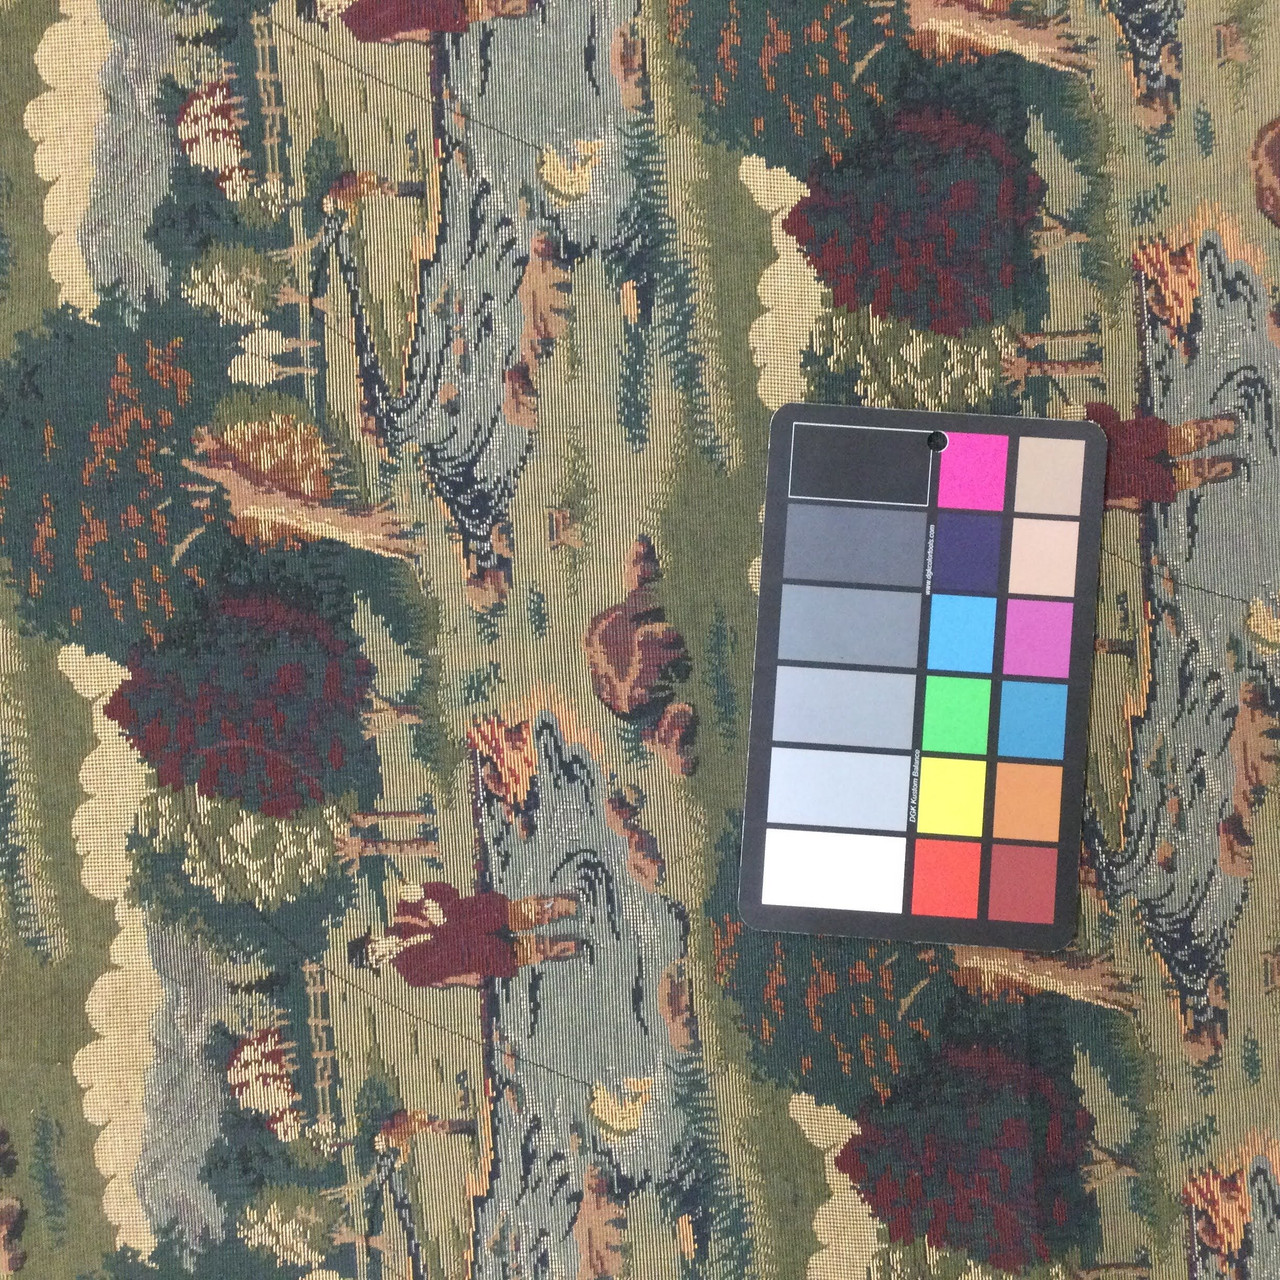 Fly Fishing Tapestry Fabric, Green / Red / Brown / Blue